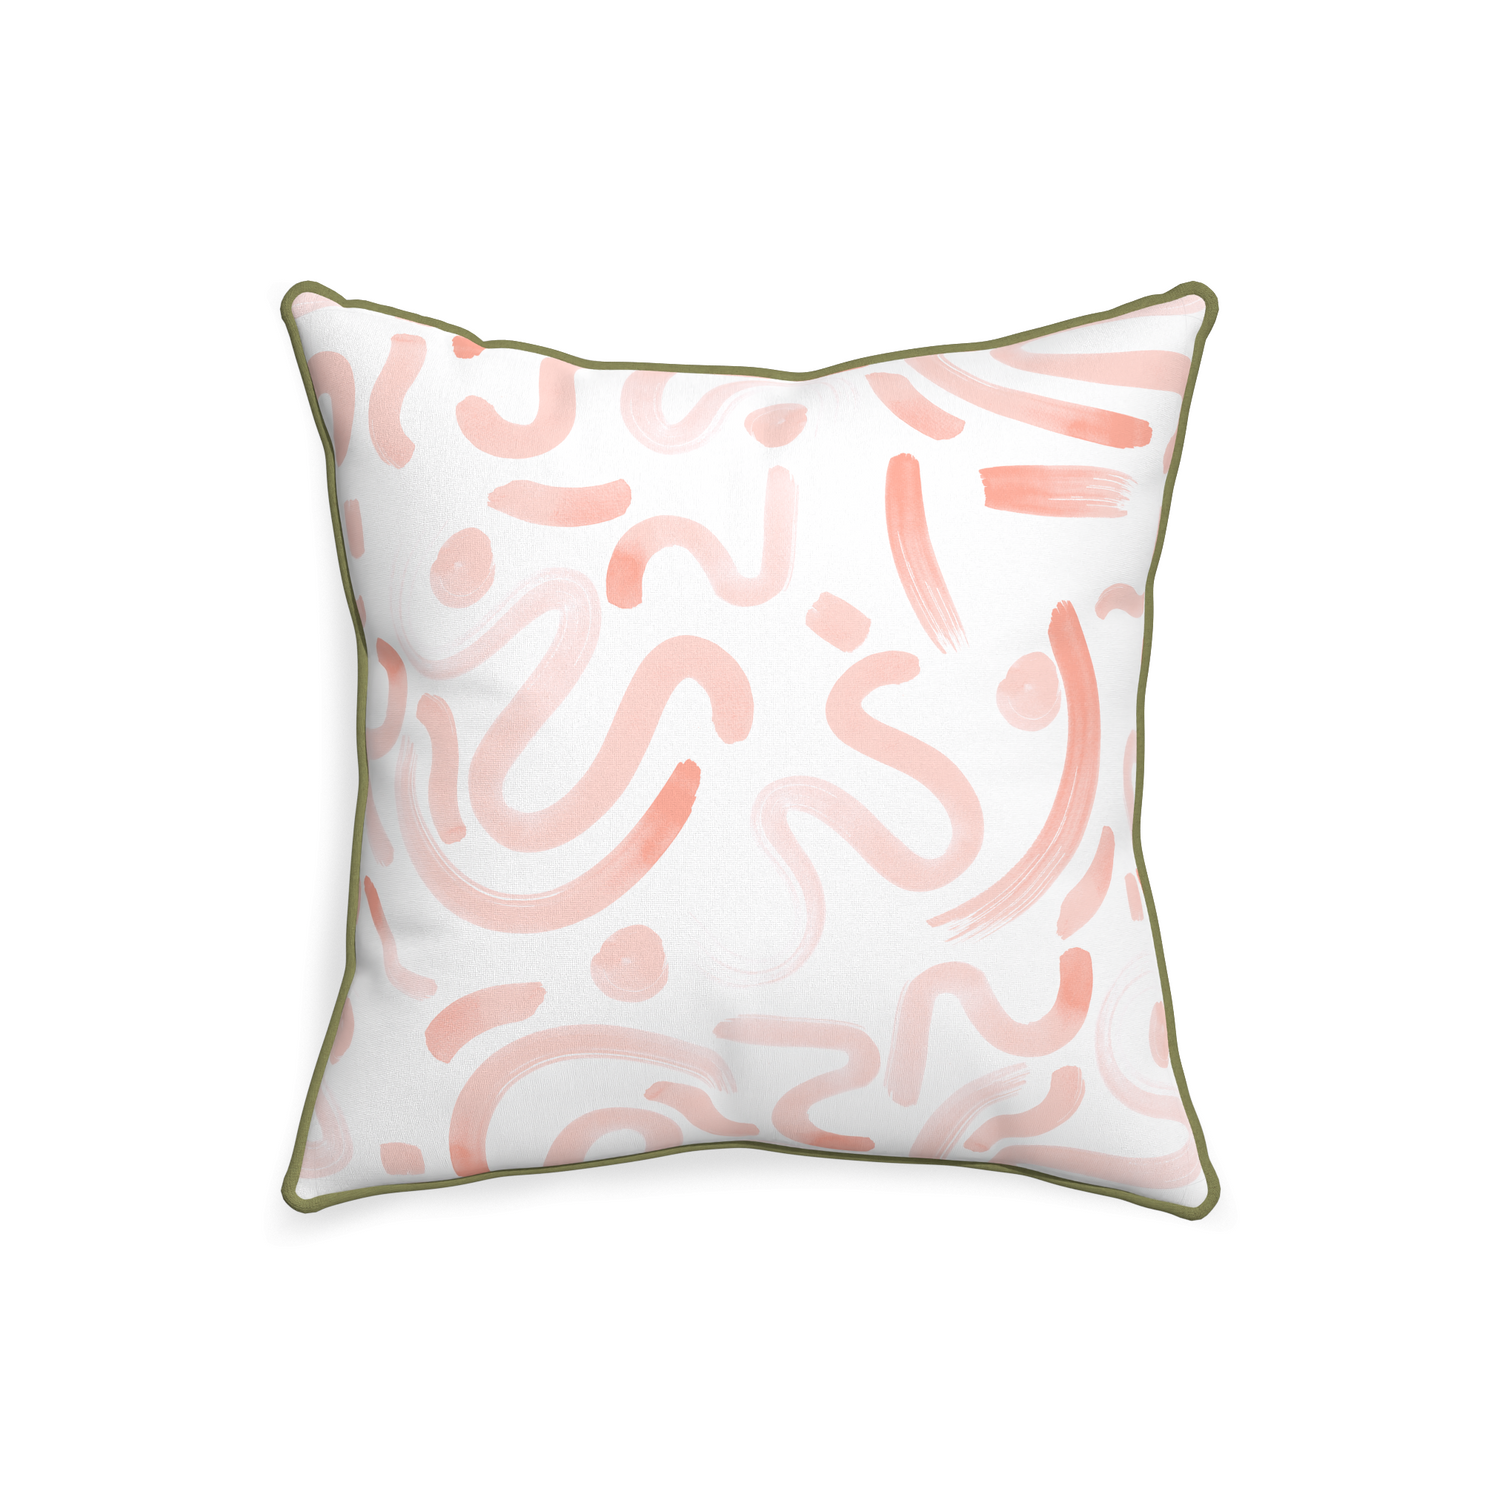 20-square hockney pink custom pillow with moss piping on white background